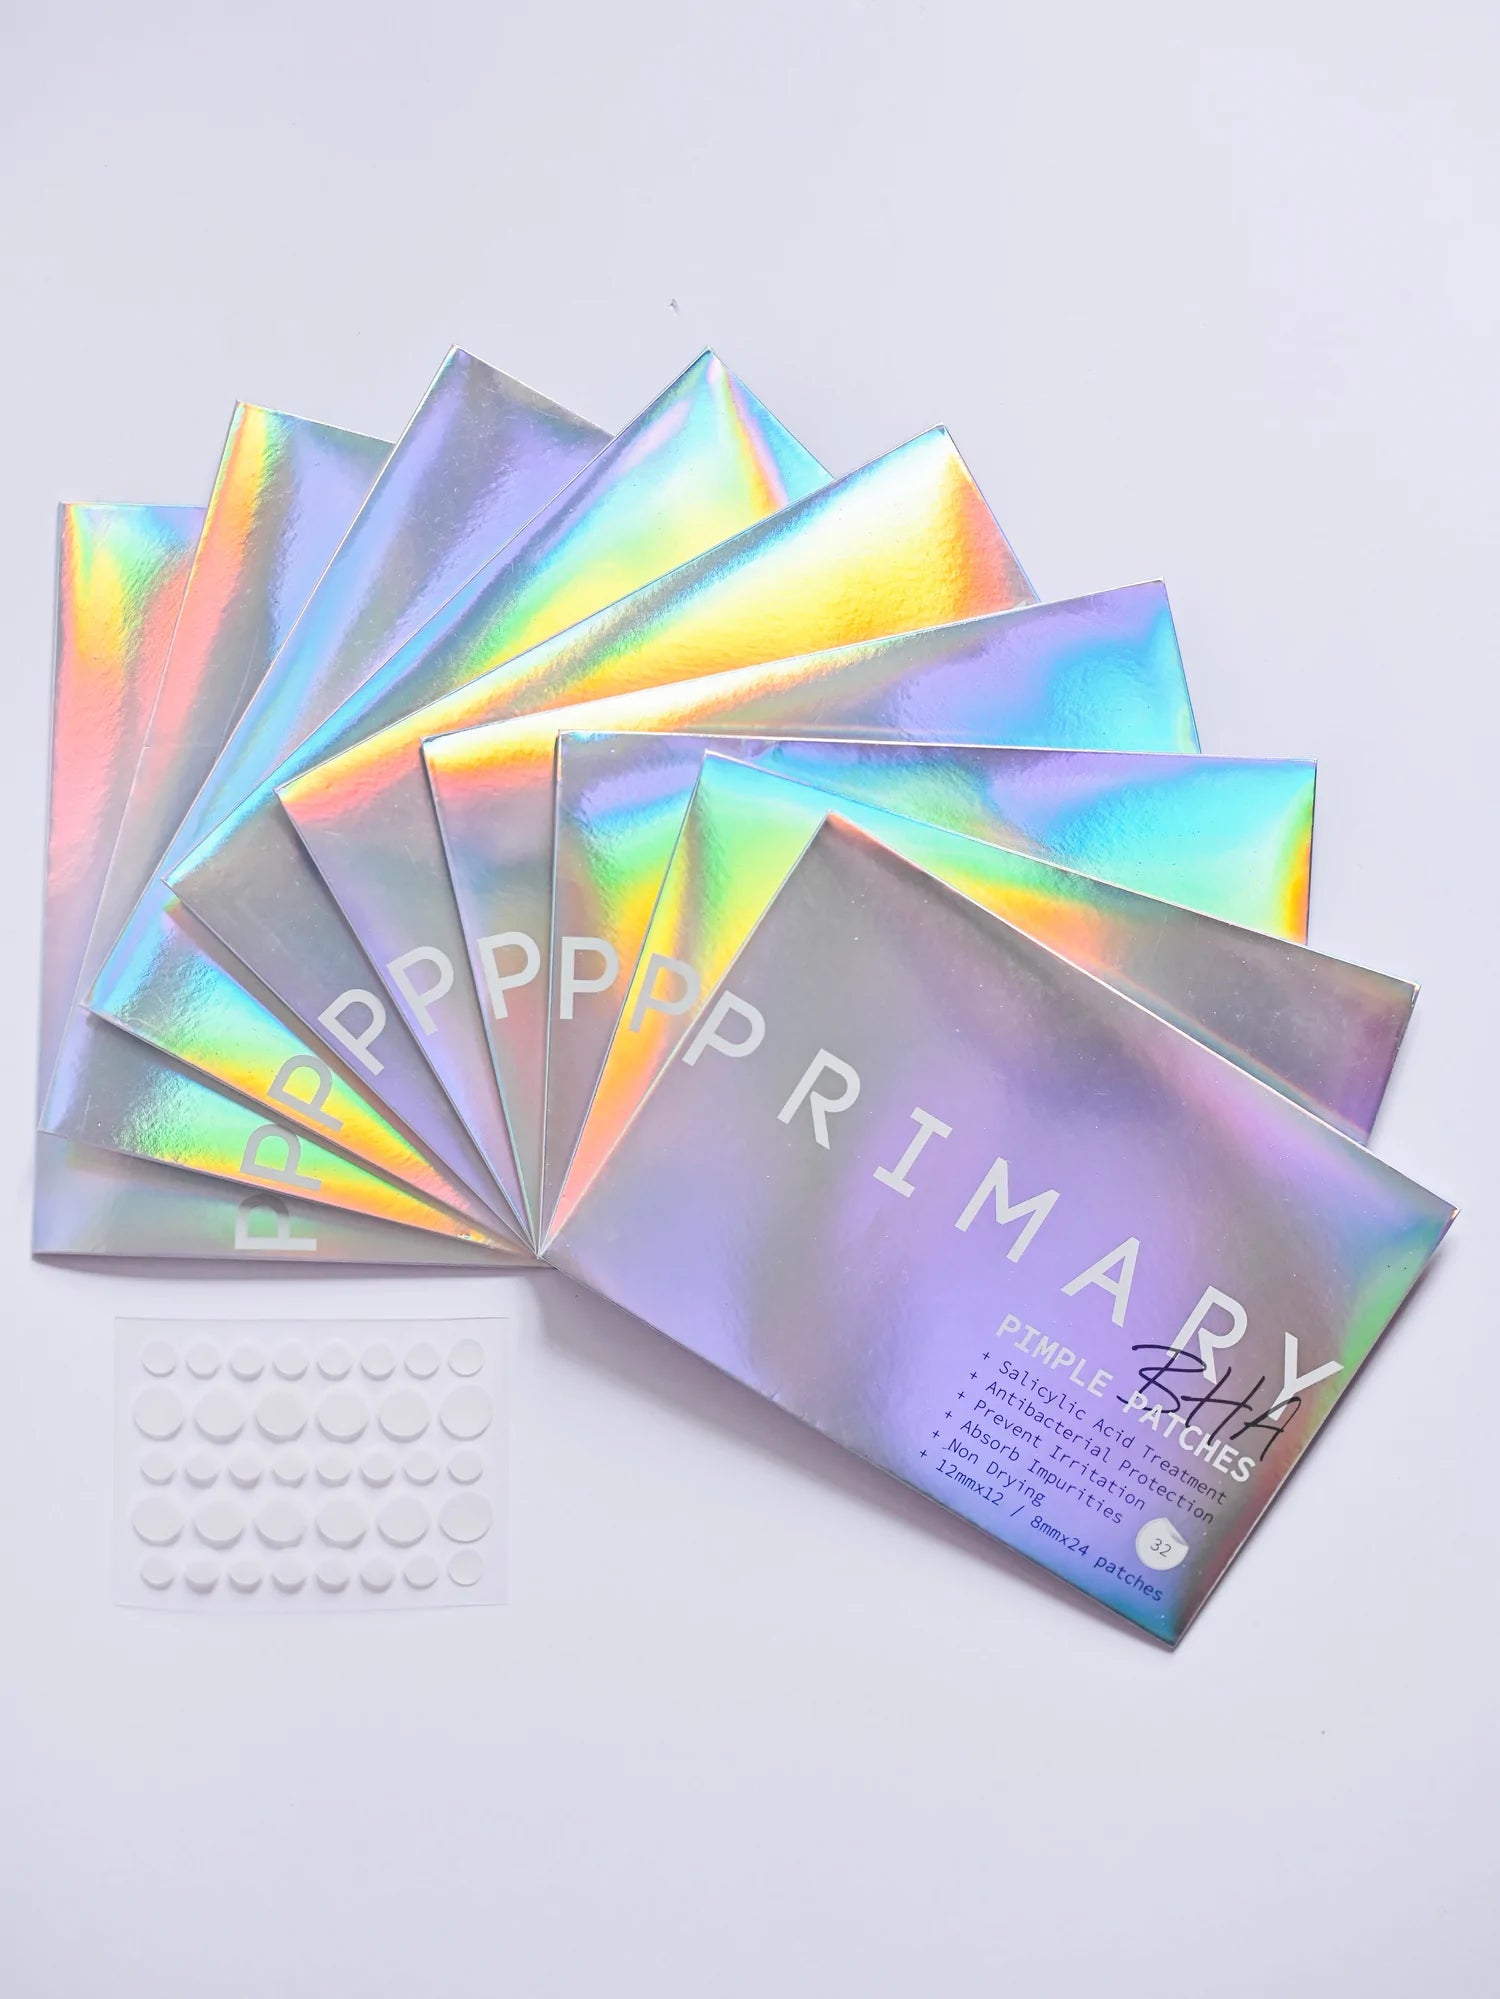 Primary BHA Pimple Patches Mask